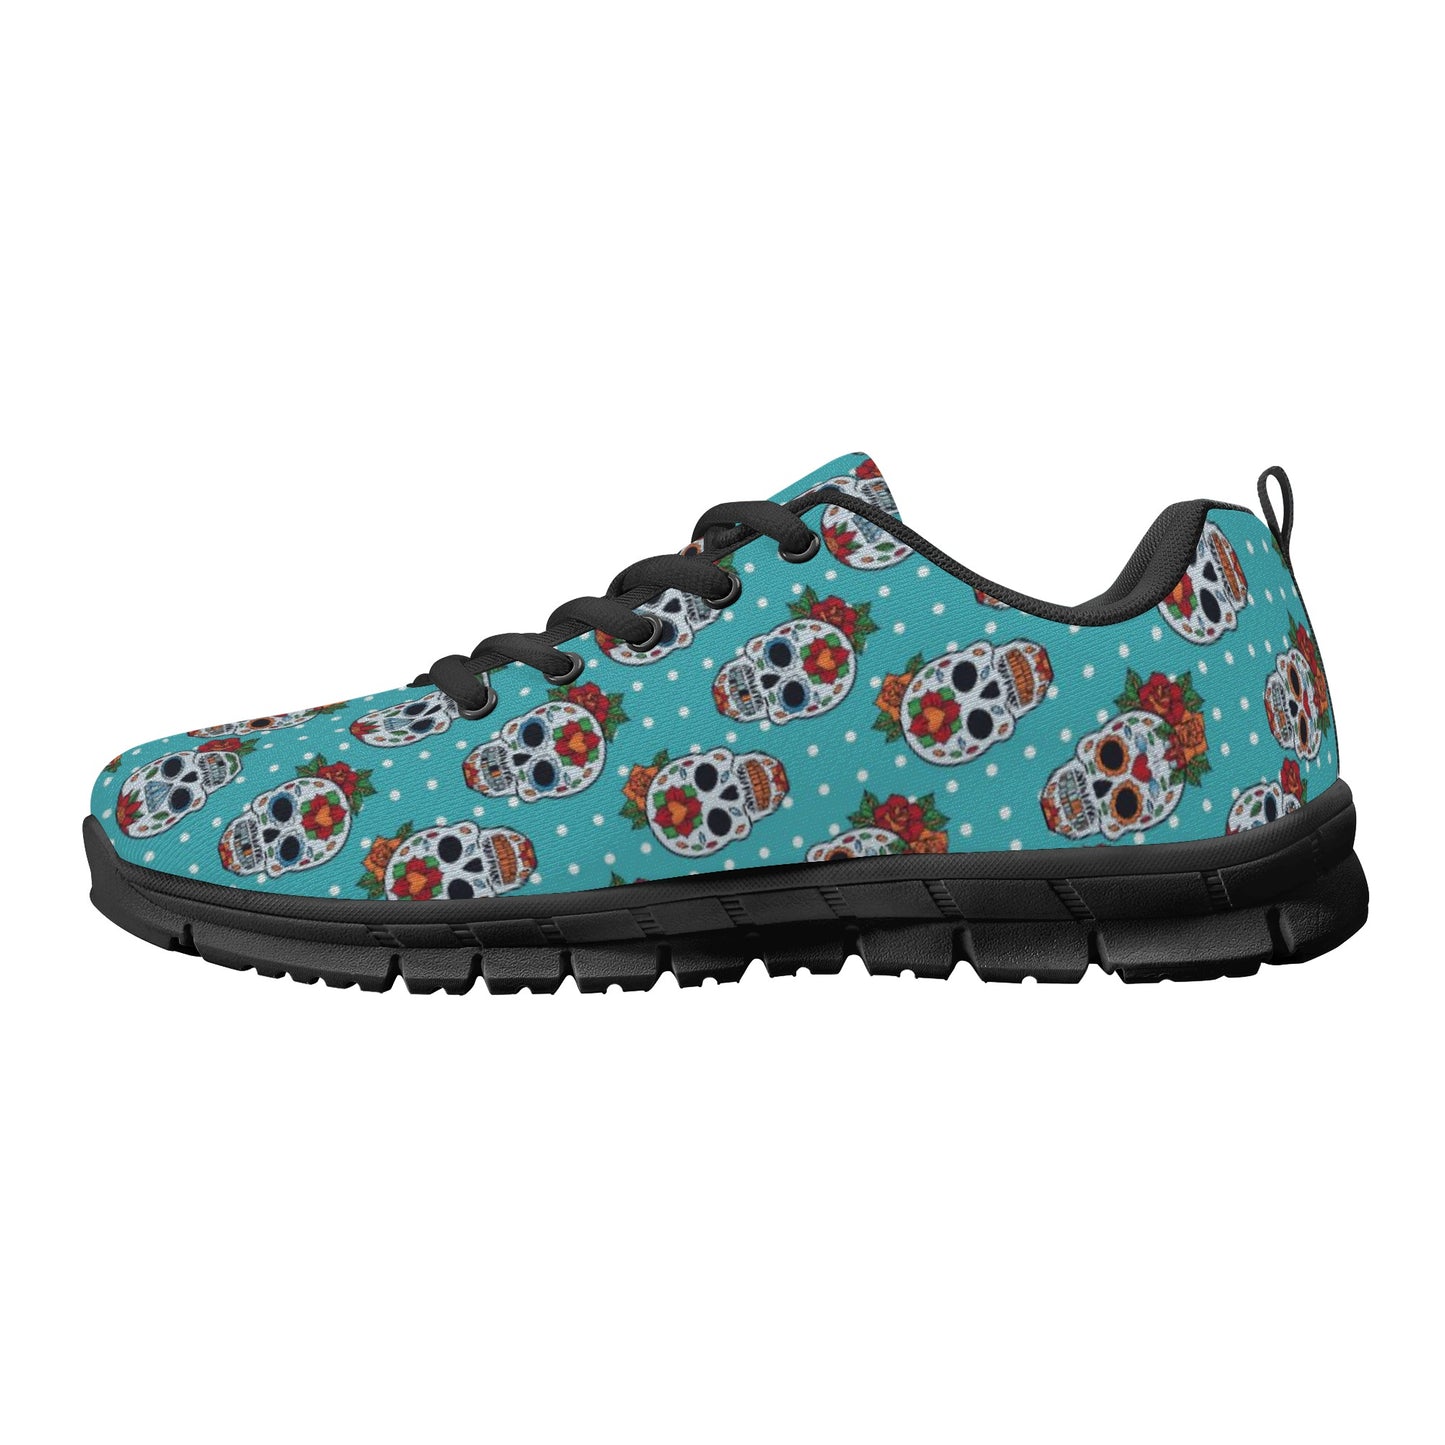 Floral sugar skull Day of the dead Women's Running Shoes